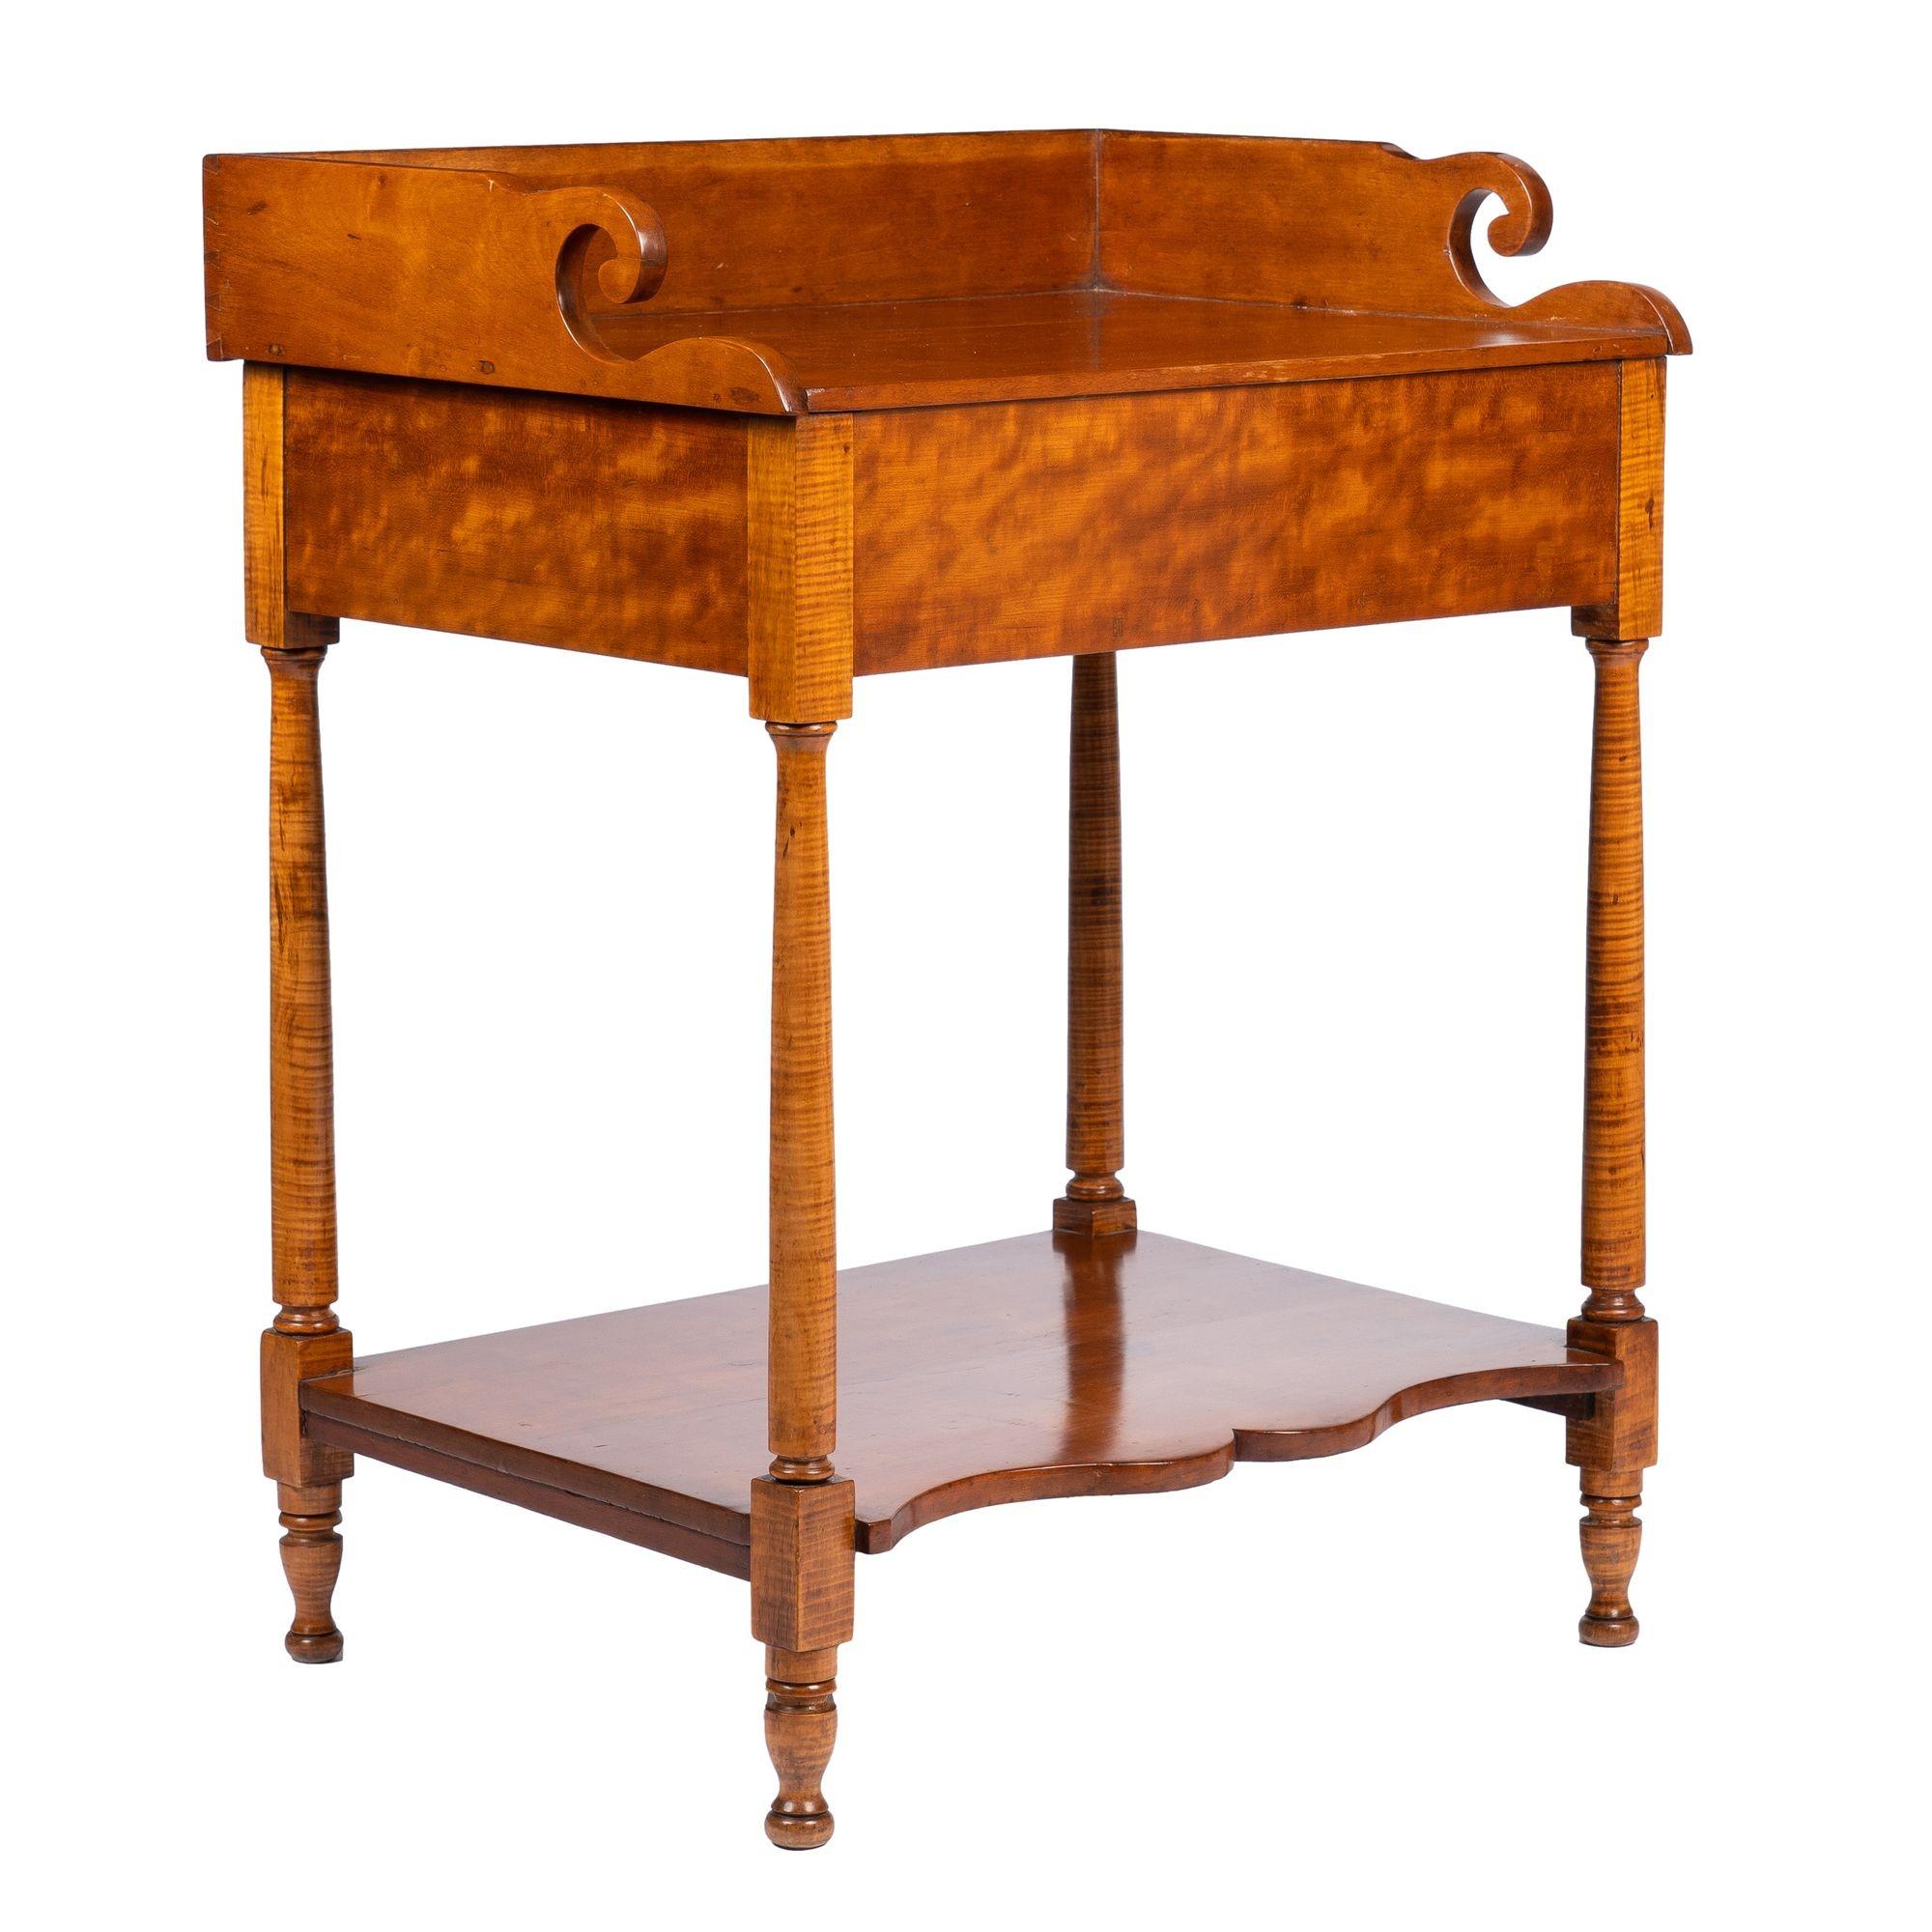 Philadelphia Cherry Wood Stand with Splash on a Conforming Apron, 1820 For Sale 2